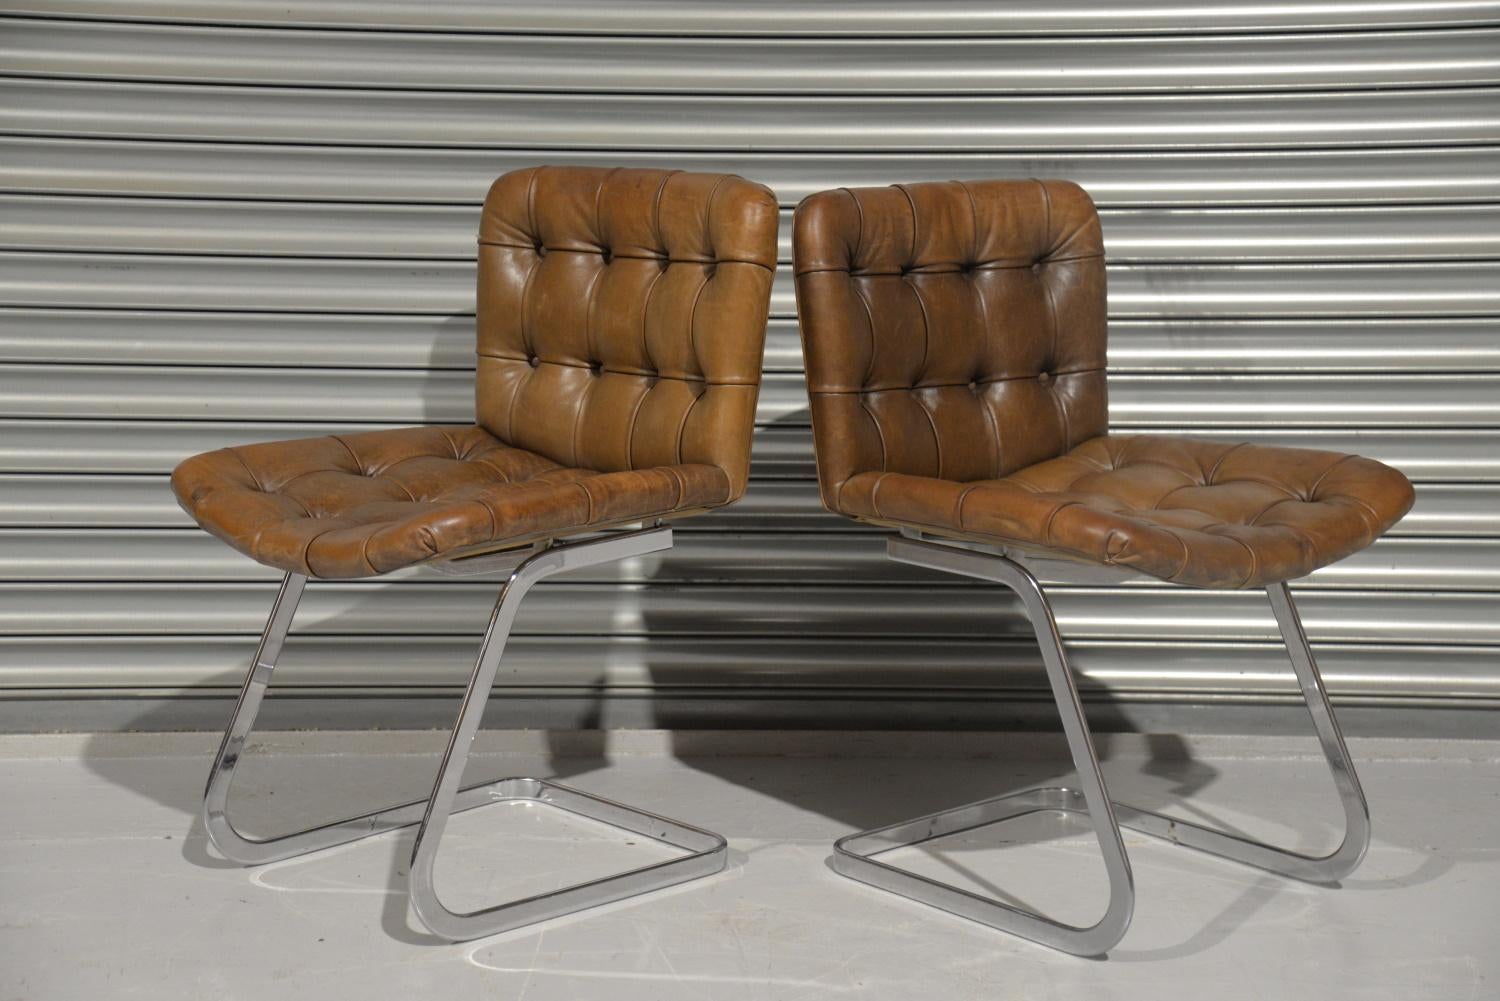 We are delighted to bring to you this set of two RH-304 chairs designed by Robert Haussmann and manufactured in Switzerland by de Sede during the 1960s. The set is upholstered in brown leather with buttons. The frames are made of chrome-plated